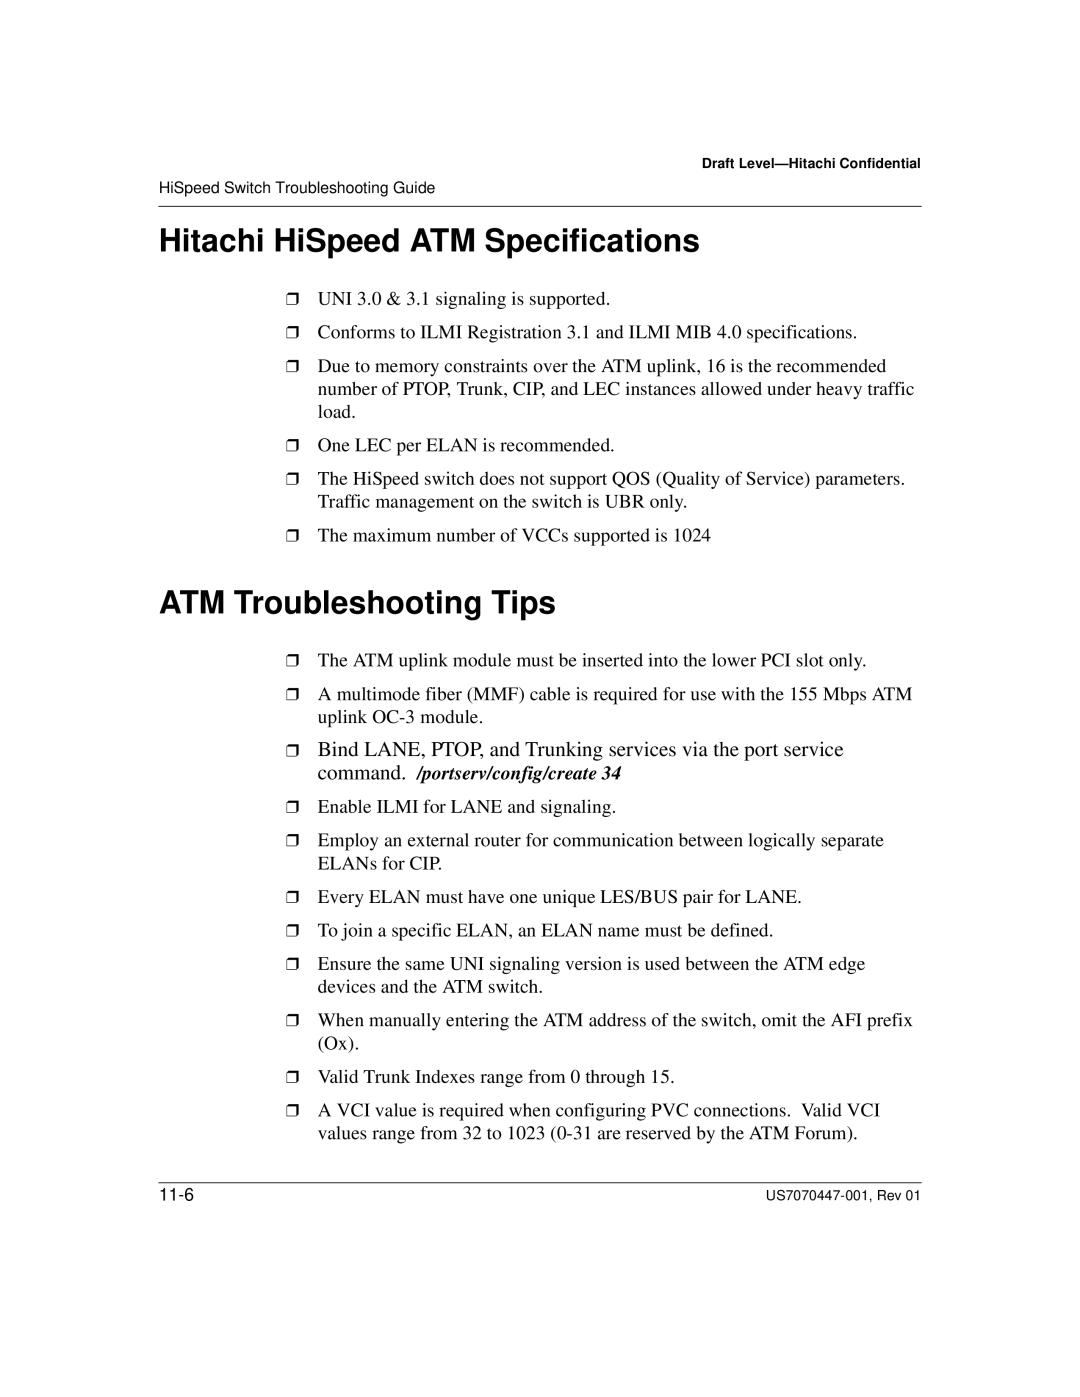 Hitachi US7070447-001 manual Hitachi HiSpeed ATM Specifications, ATM Troubleshooting Tips 